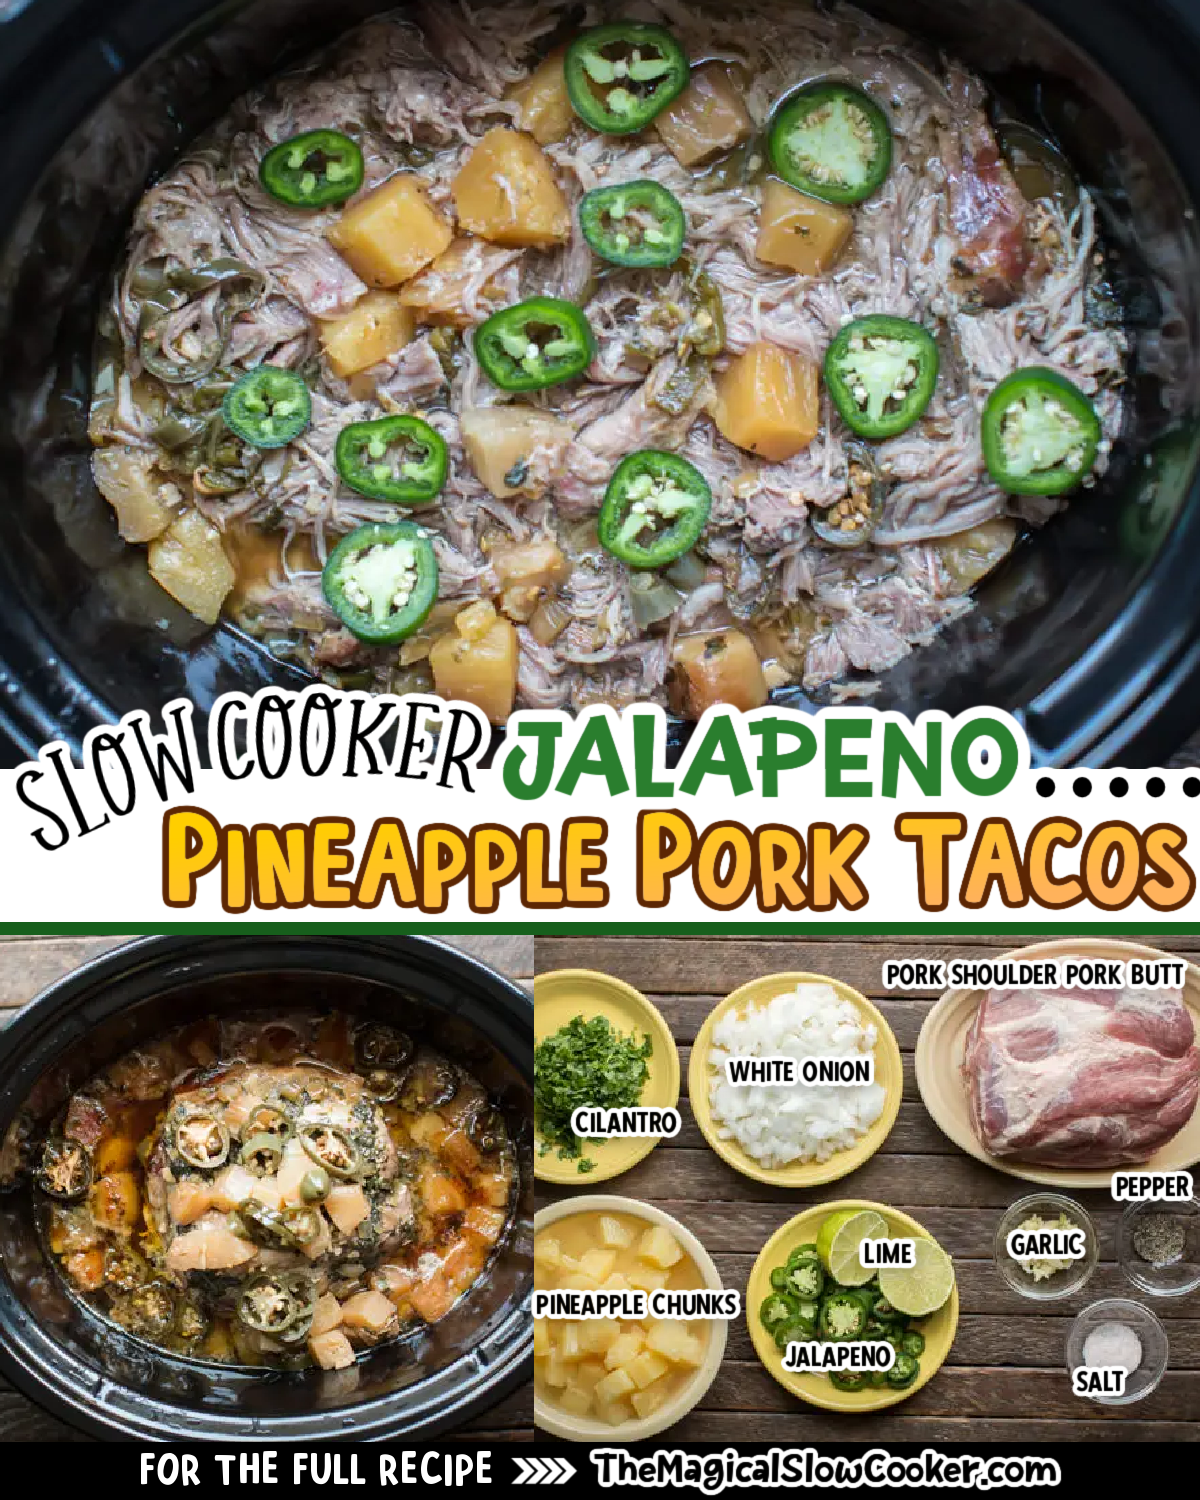 Jalapeno pineapple pork tacos images with text of what the ingredients are for facebook.